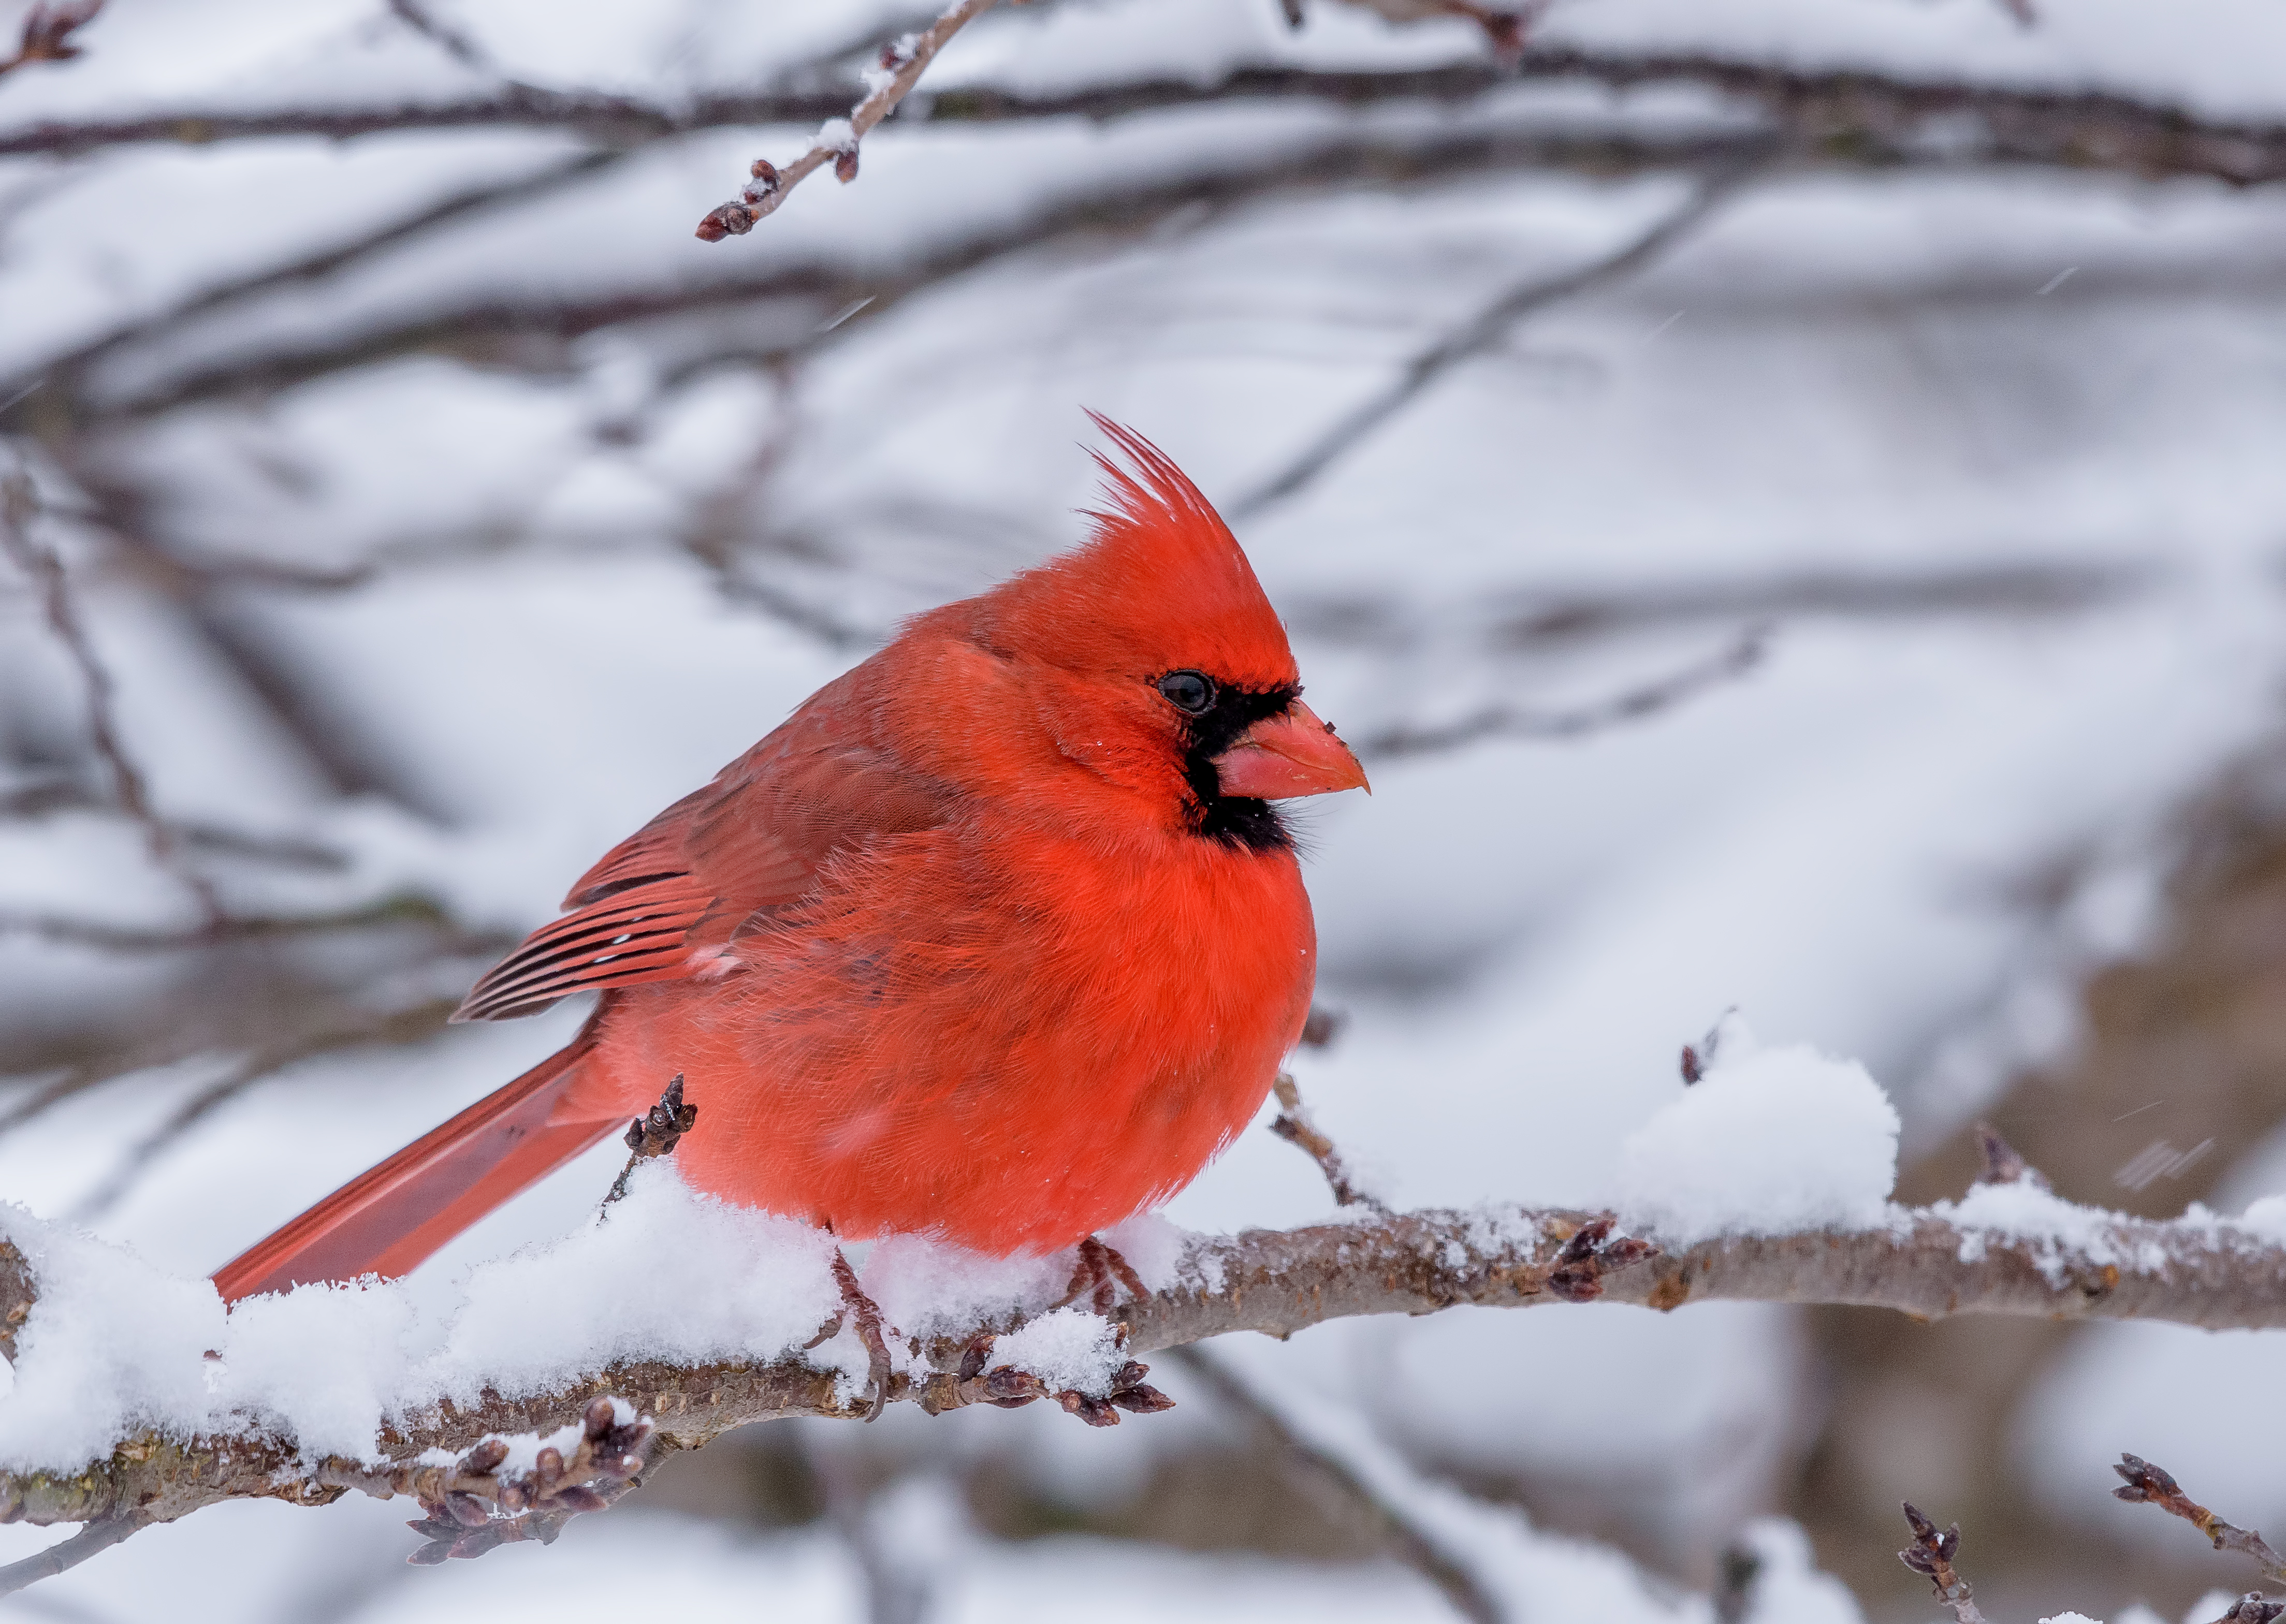 Male Cardinal perched during a snow storm | Source: Getty Images